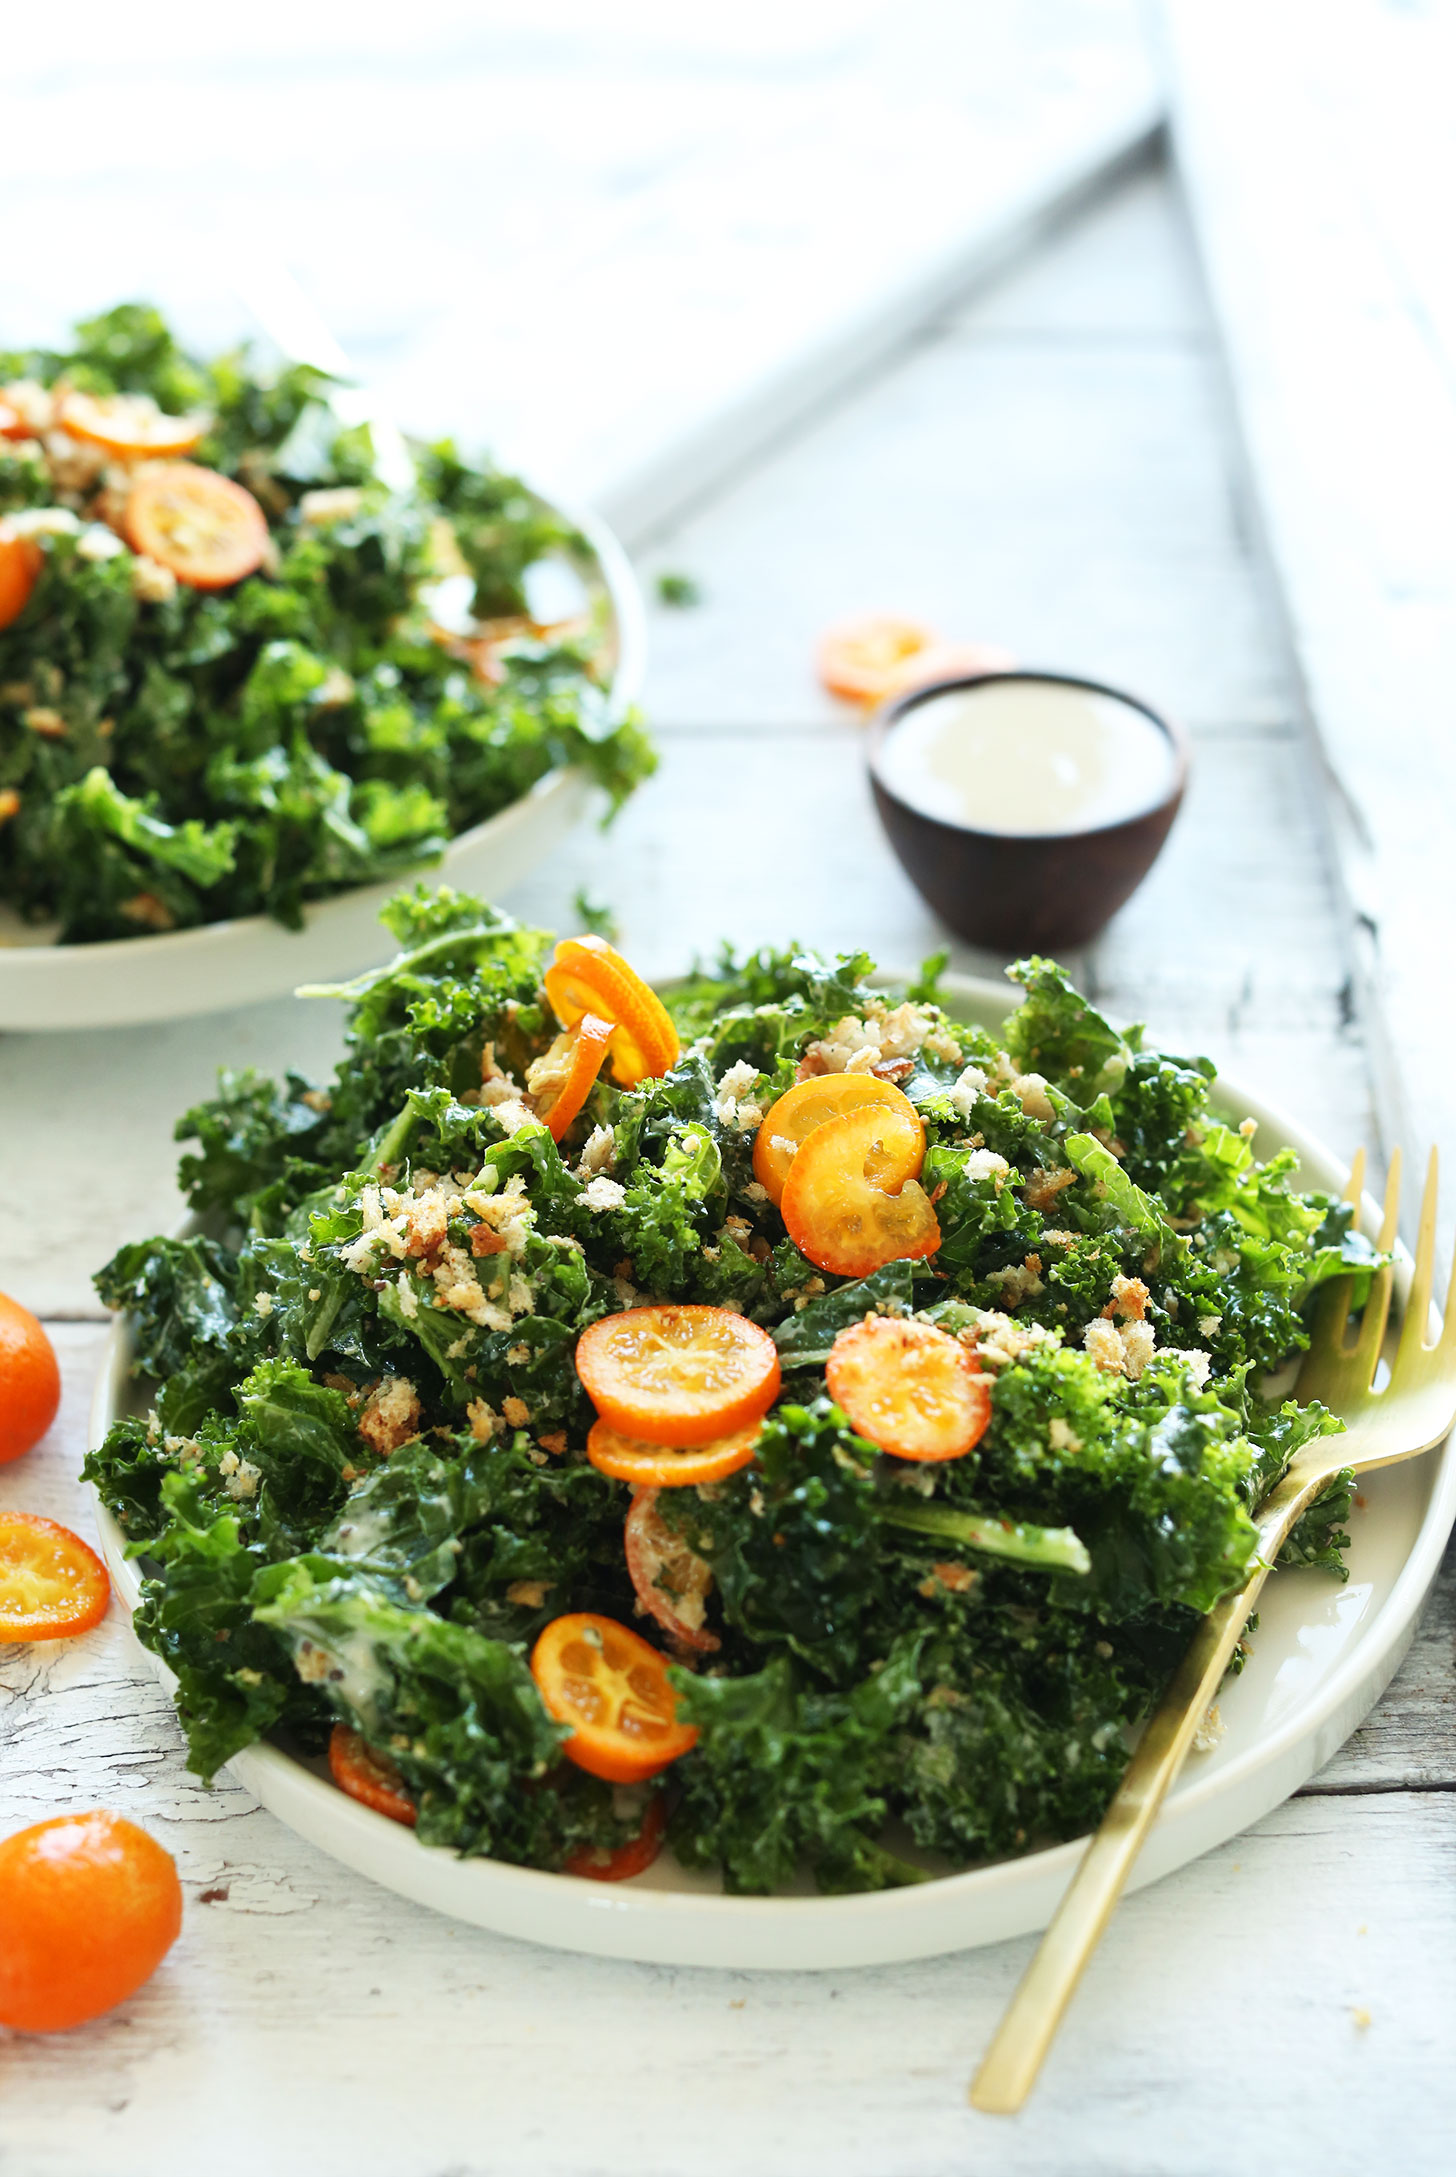 Big plate of our healthy and delicious vegan Kale Salad with Kumquats, Chia Seeds, and Tahini Dressing